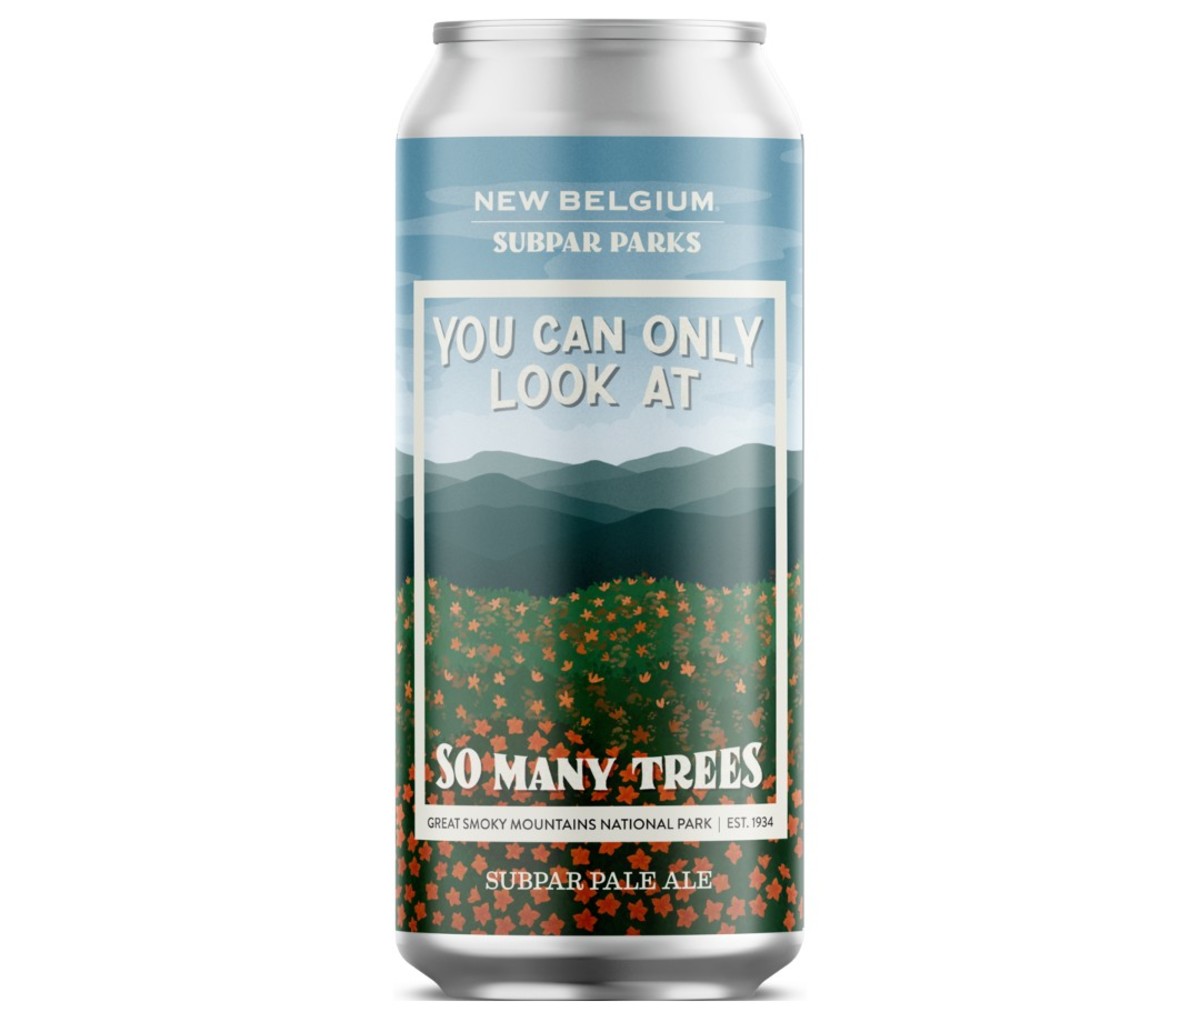 Alaska Airlines teams up with Best Day Brewing to add craft non-alcoholic  beer to its premium beverage lineup - Alaska Airlines News